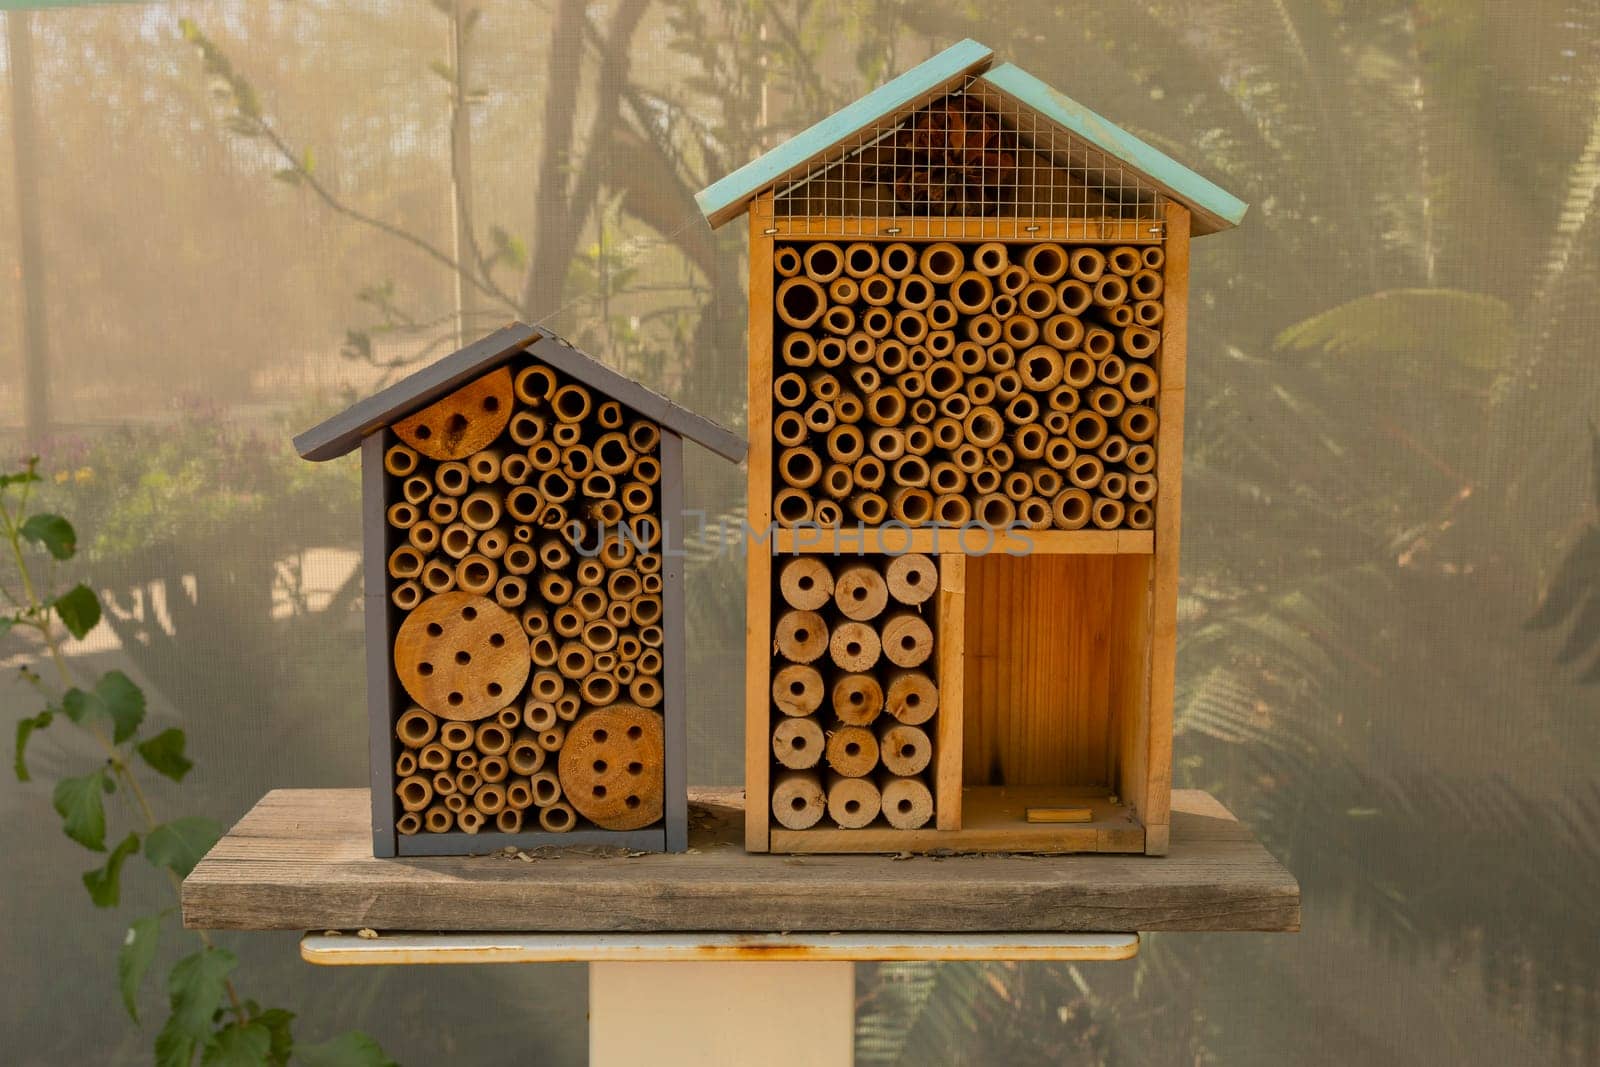 Wooden Insect House, Decorative Bug Hotel, Ladybird And Bee, Fly. Compartments And Natural Components. Outdoor Eco Home For Butterfly Hibernation And Ecological Gardening. Horizontal Plane by netatsi